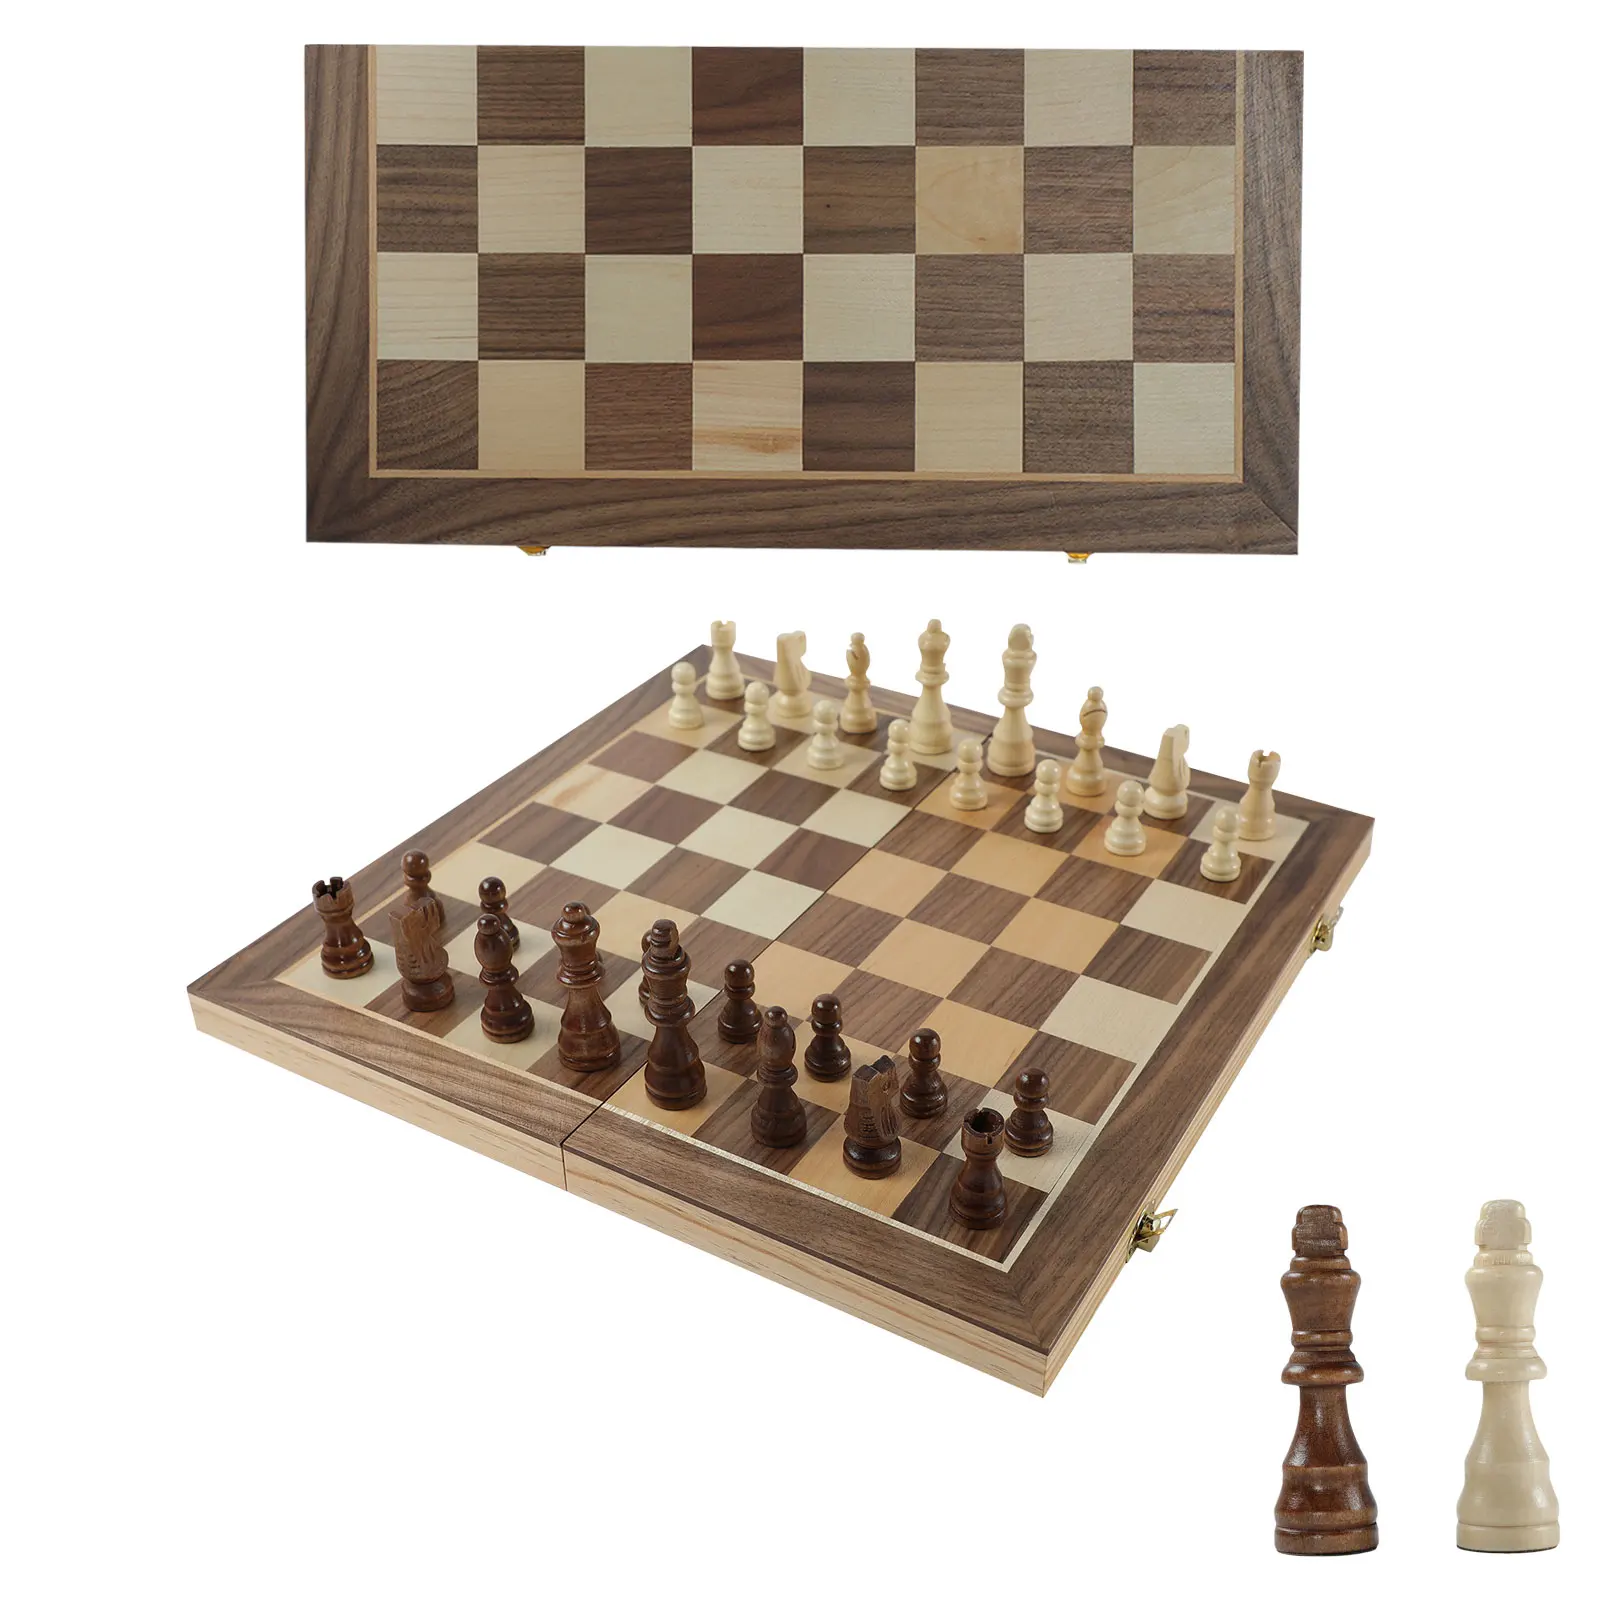 

40*40cm Wooden Magnetic Chess Set Foldable Portable Battle Chess Children Adult Creative Educational Toys Checkers Game